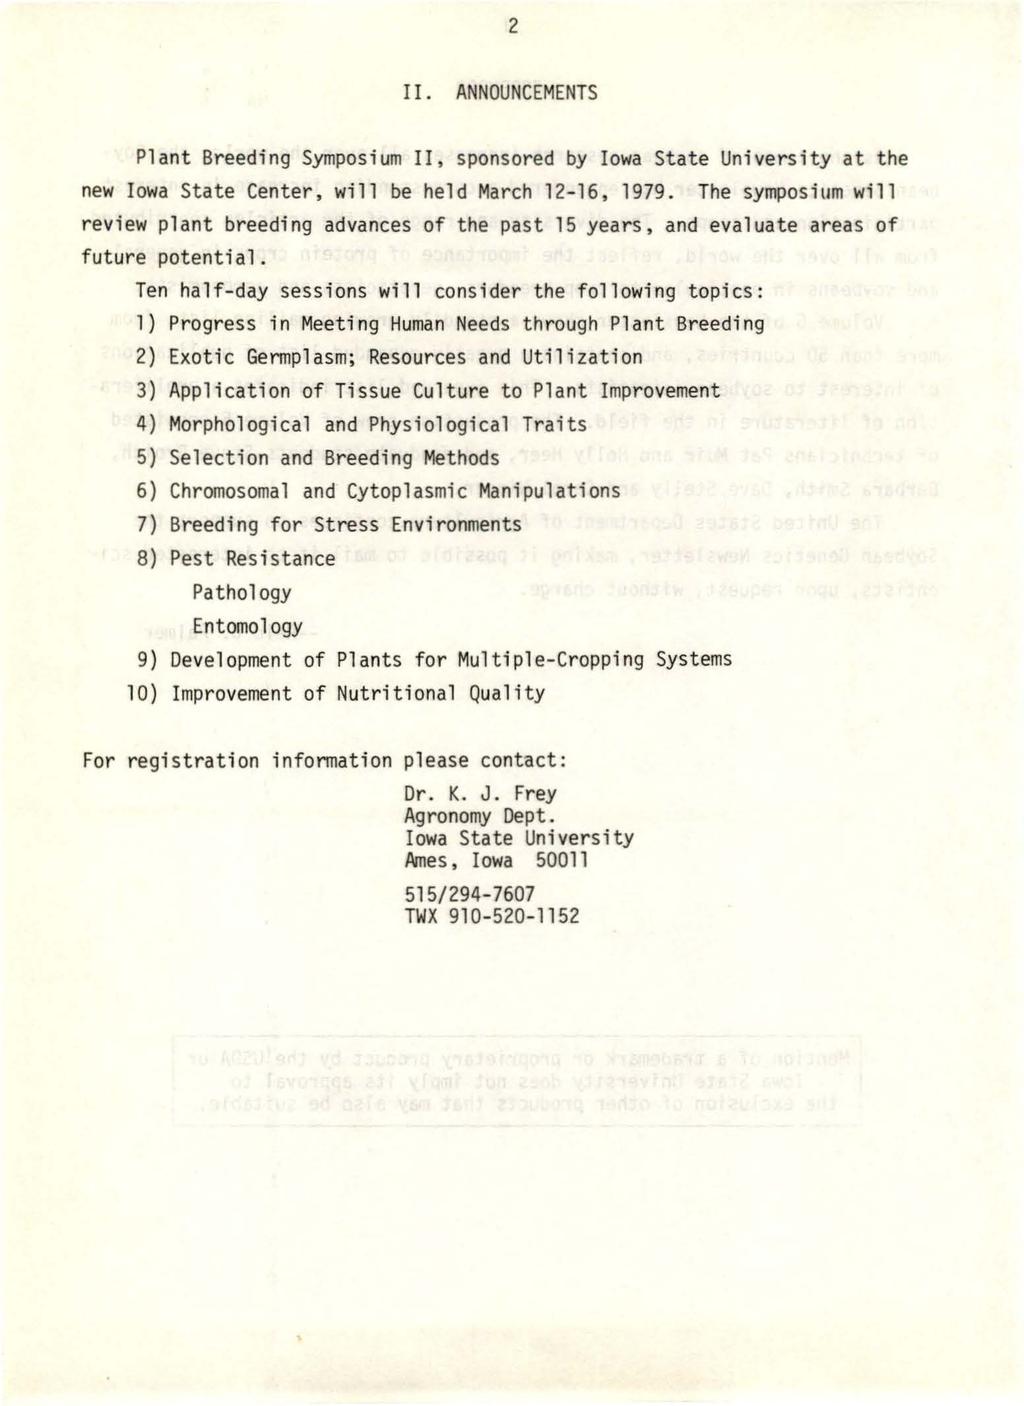 2 II. ANNOUNCEMENTS Plant Breeding Symposium II, sponsored by Iowa State University at the new Iowa State Center, will be held March 12-16, 1979.